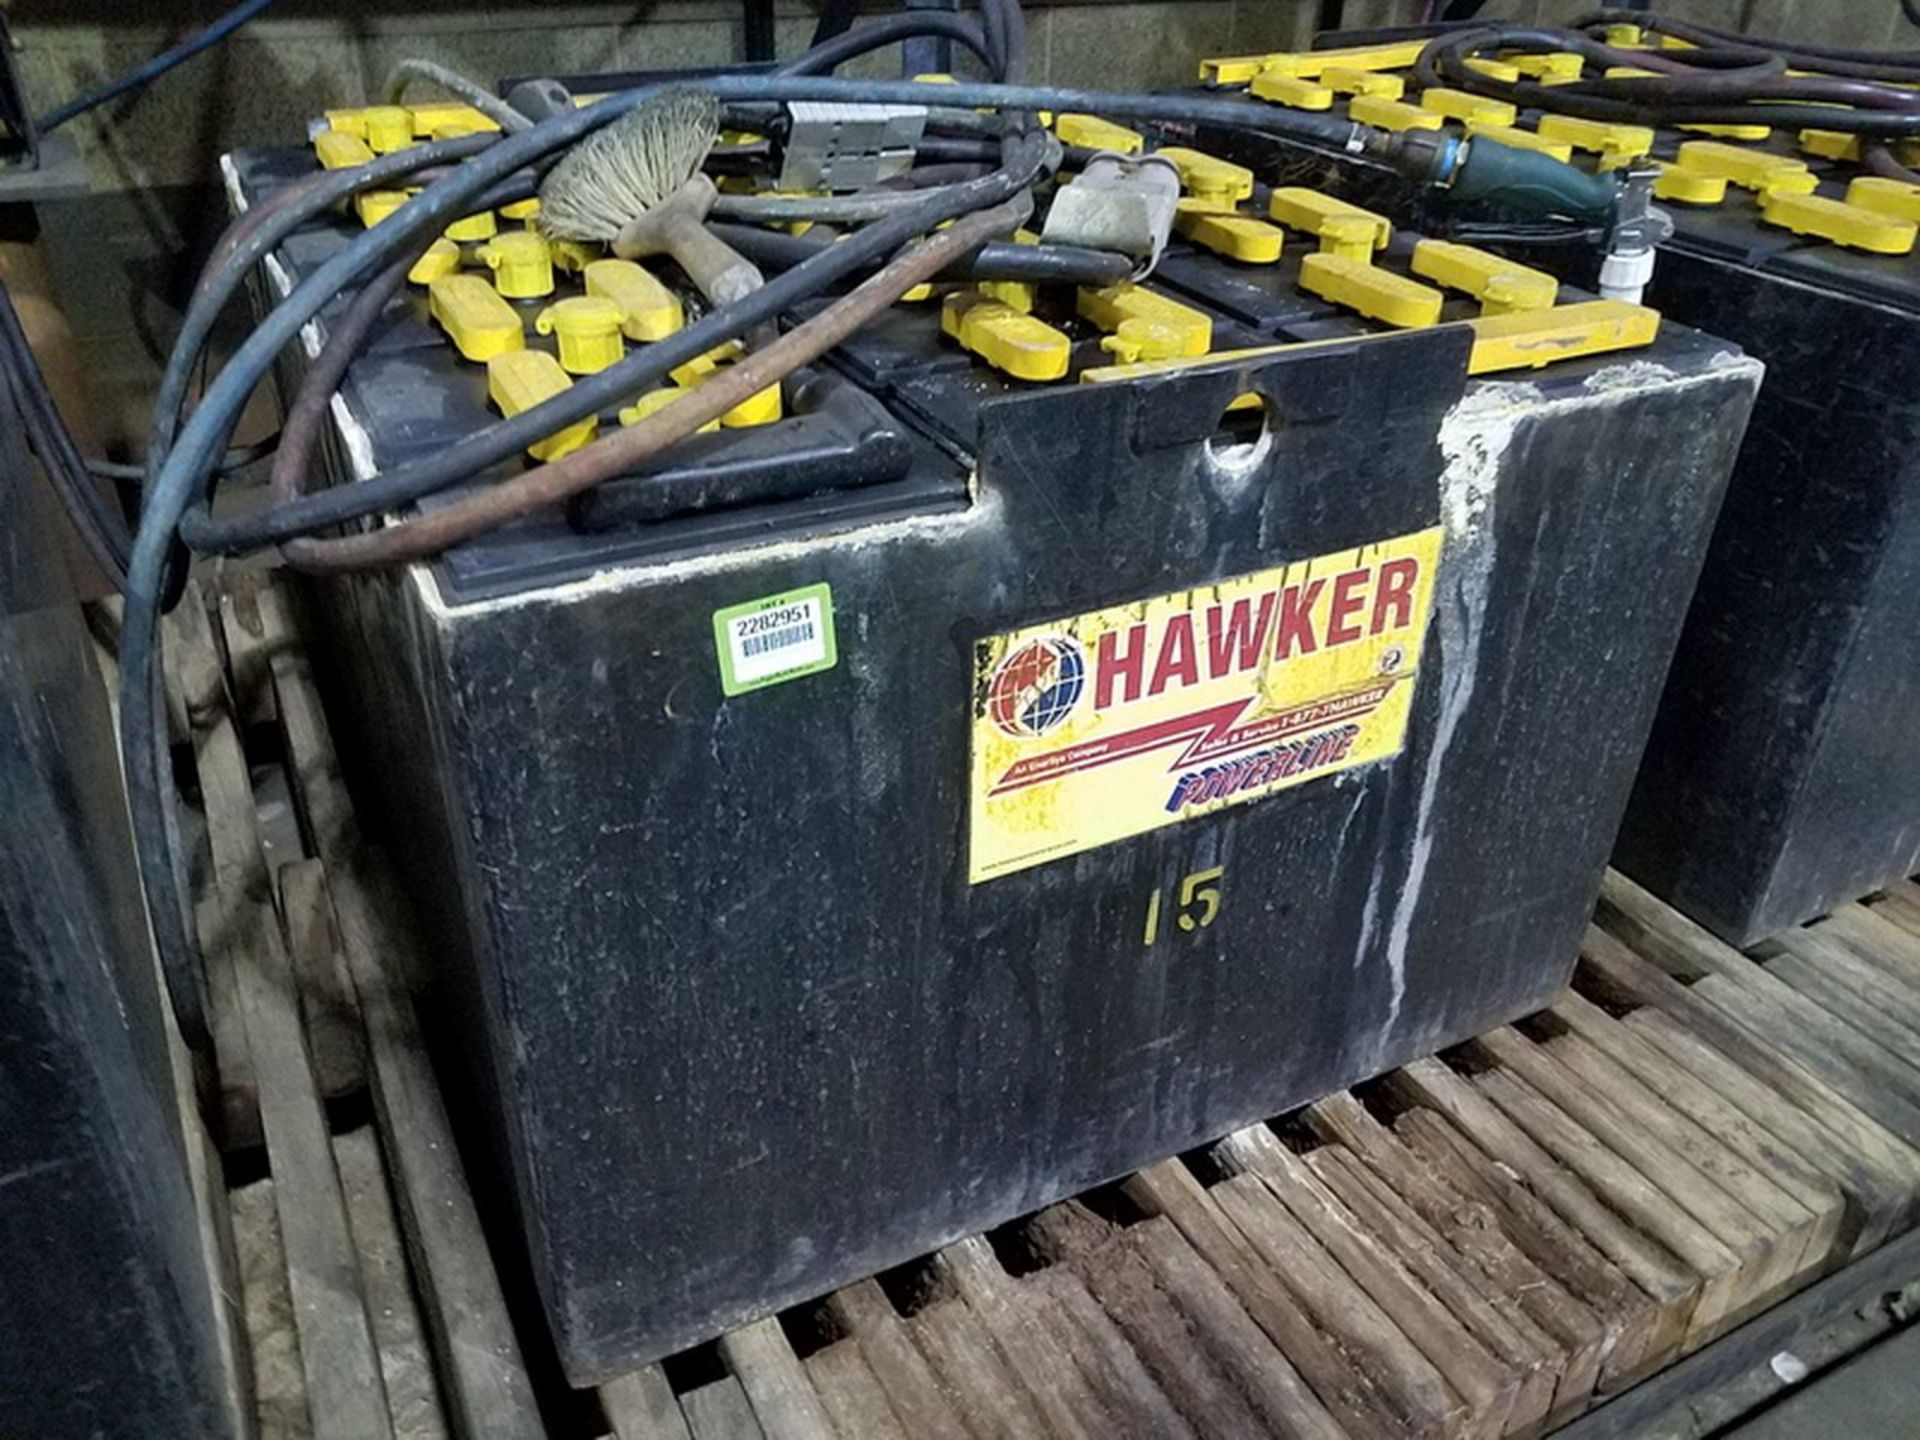 Hawker Powersource Model EO-583 36-Volt Spare Forklift Battery, type 018085F27, hour capacity 1105